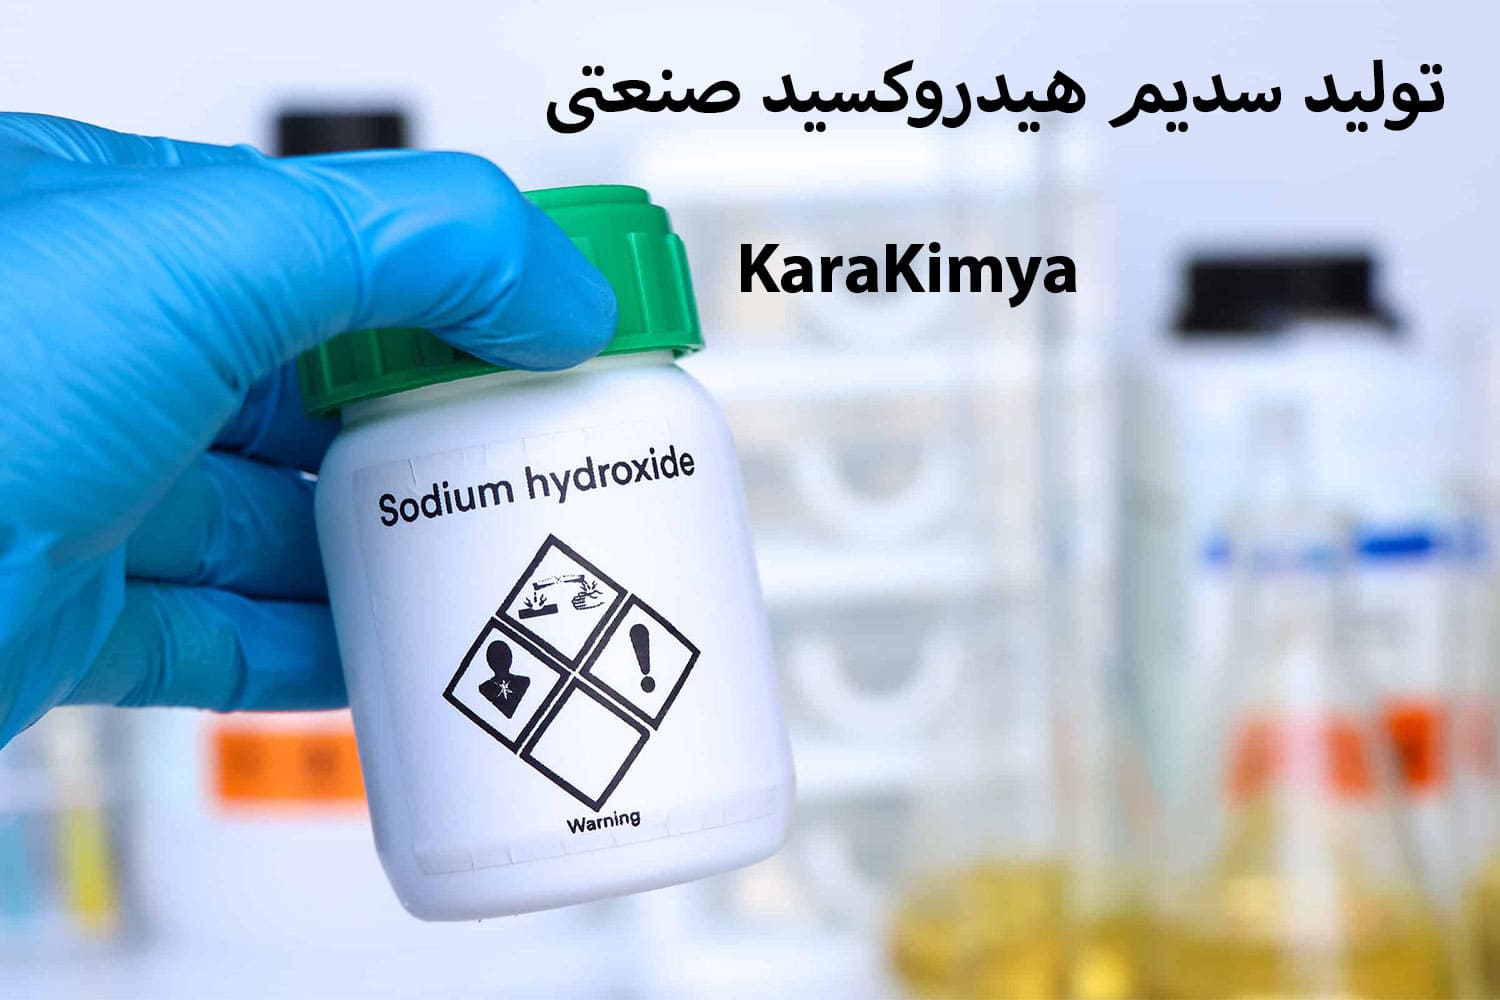 Industrial Sodium Hydroxide production